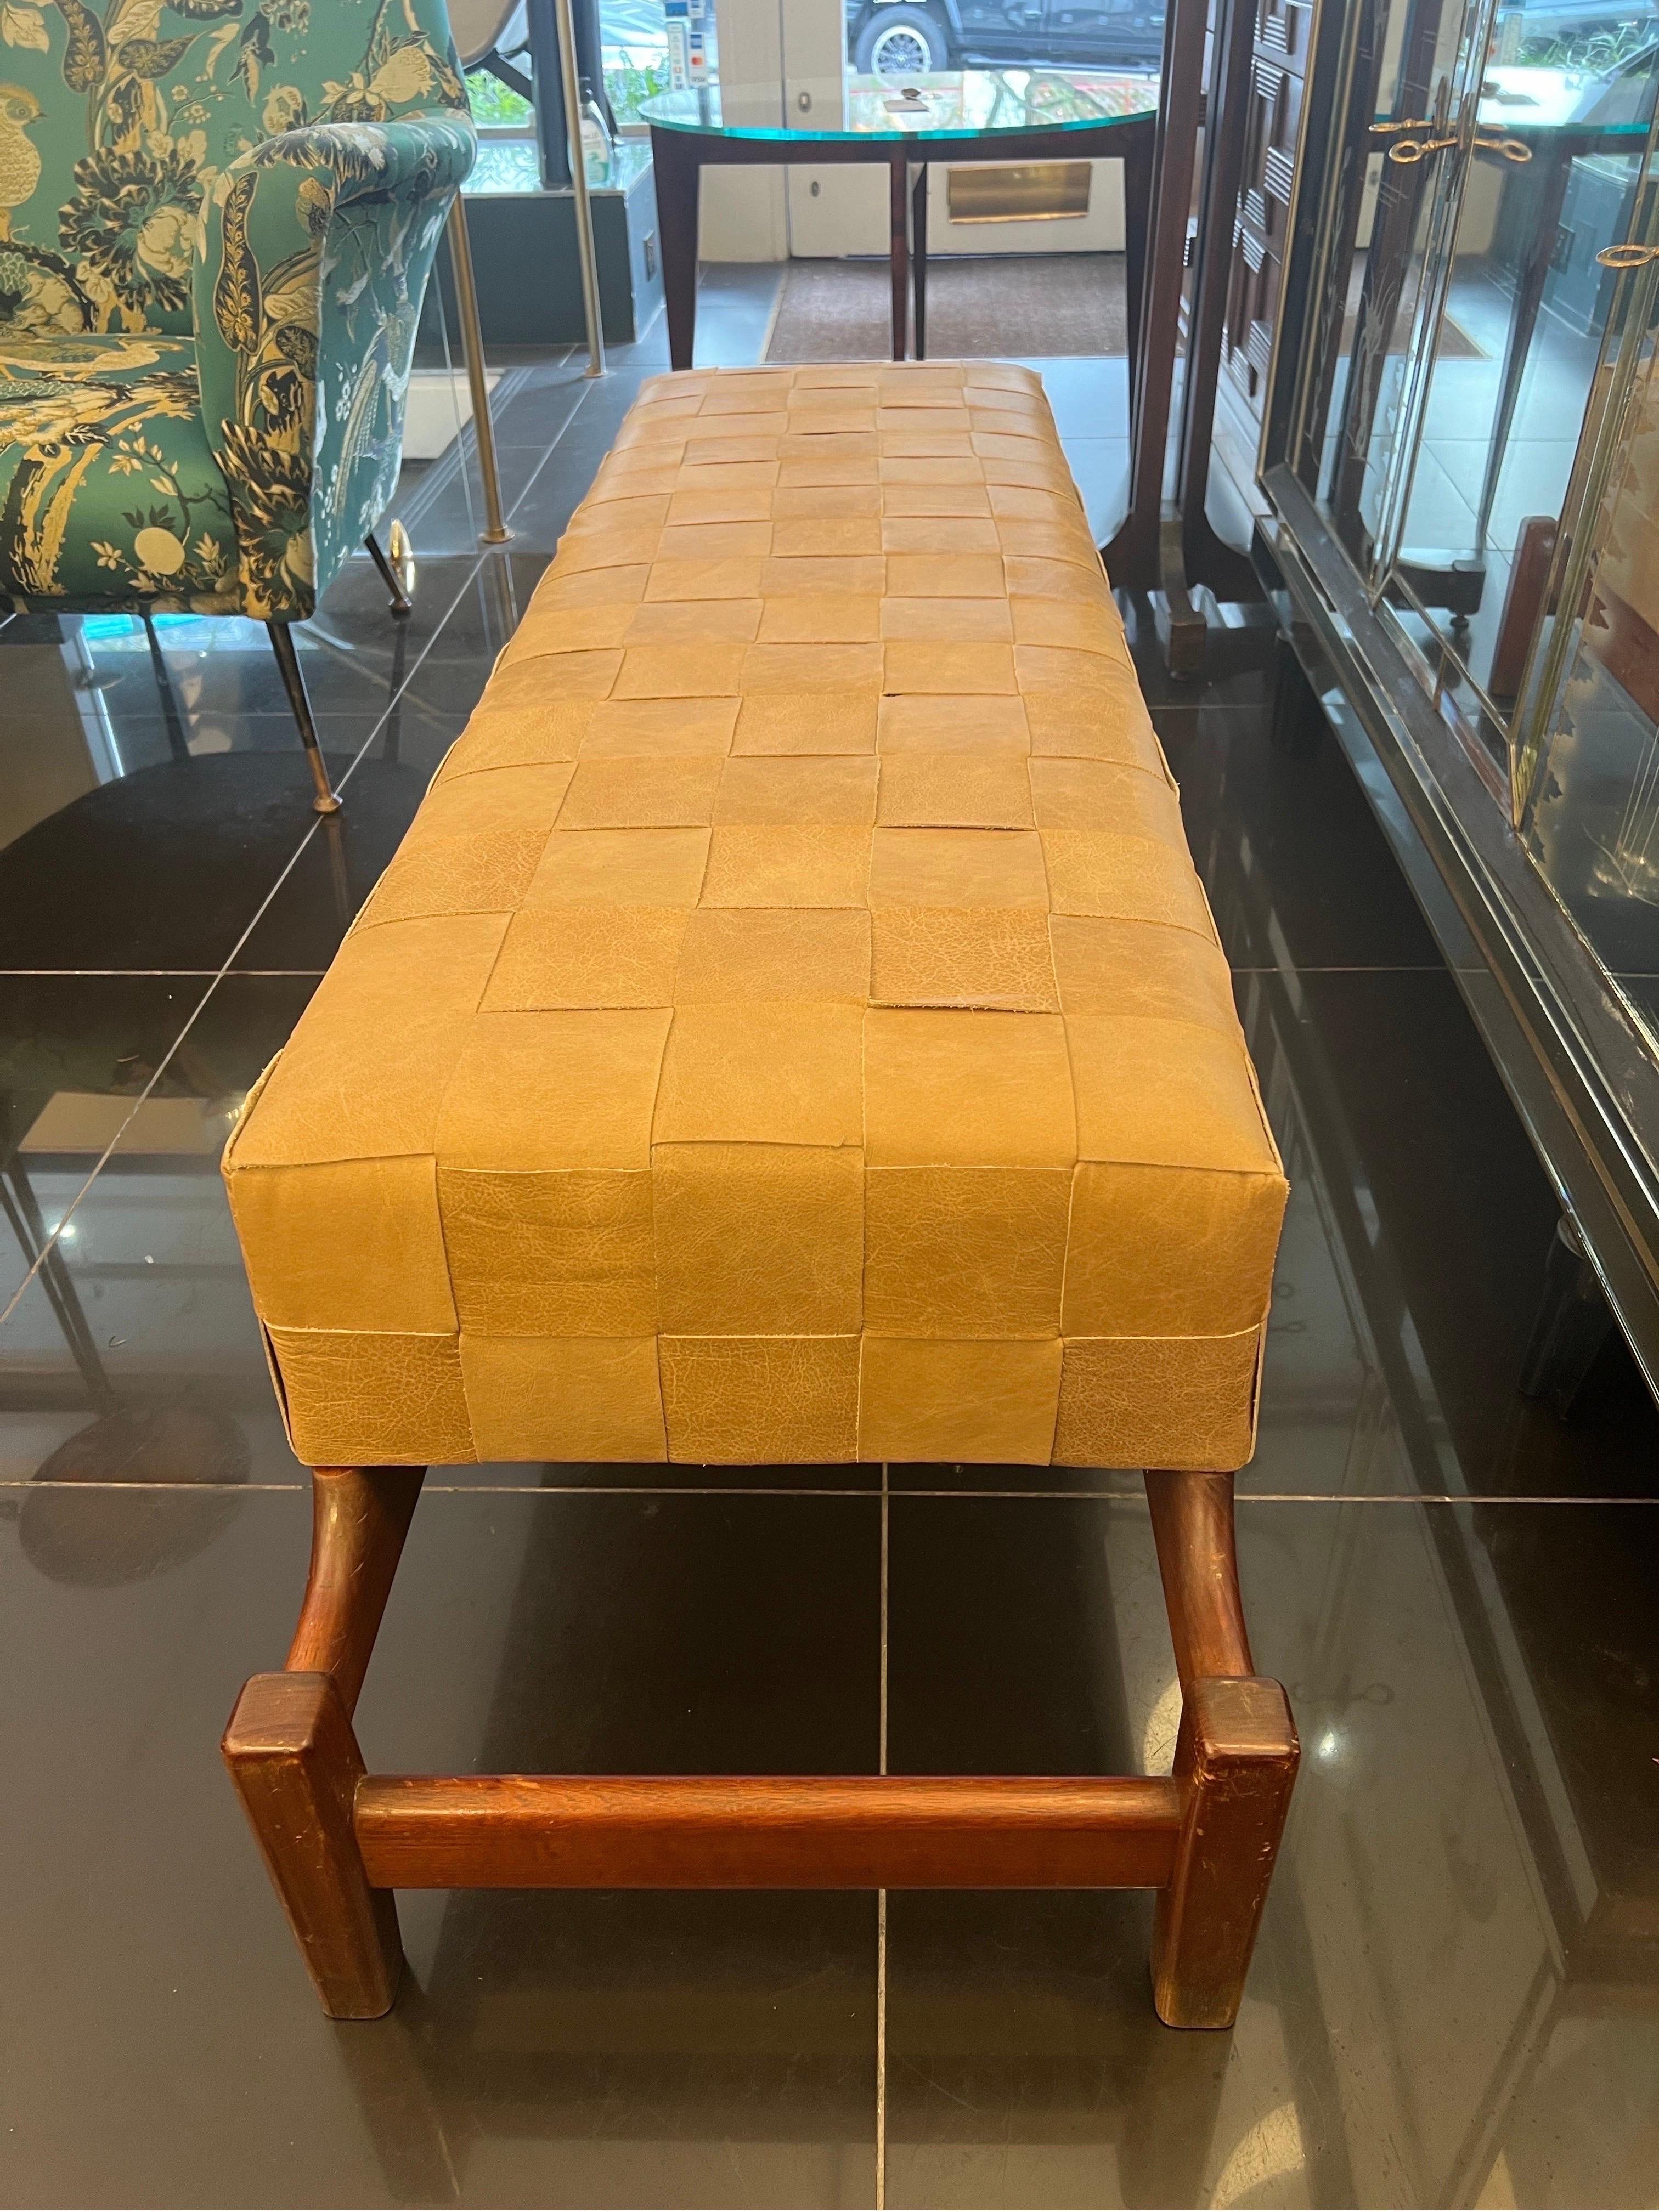 A large bench in sculptural form featuring an extended geometric design walnut frame standing on four legs with a built in rectangular cushion seat in sand colour woven leather.
C1960
Italy 